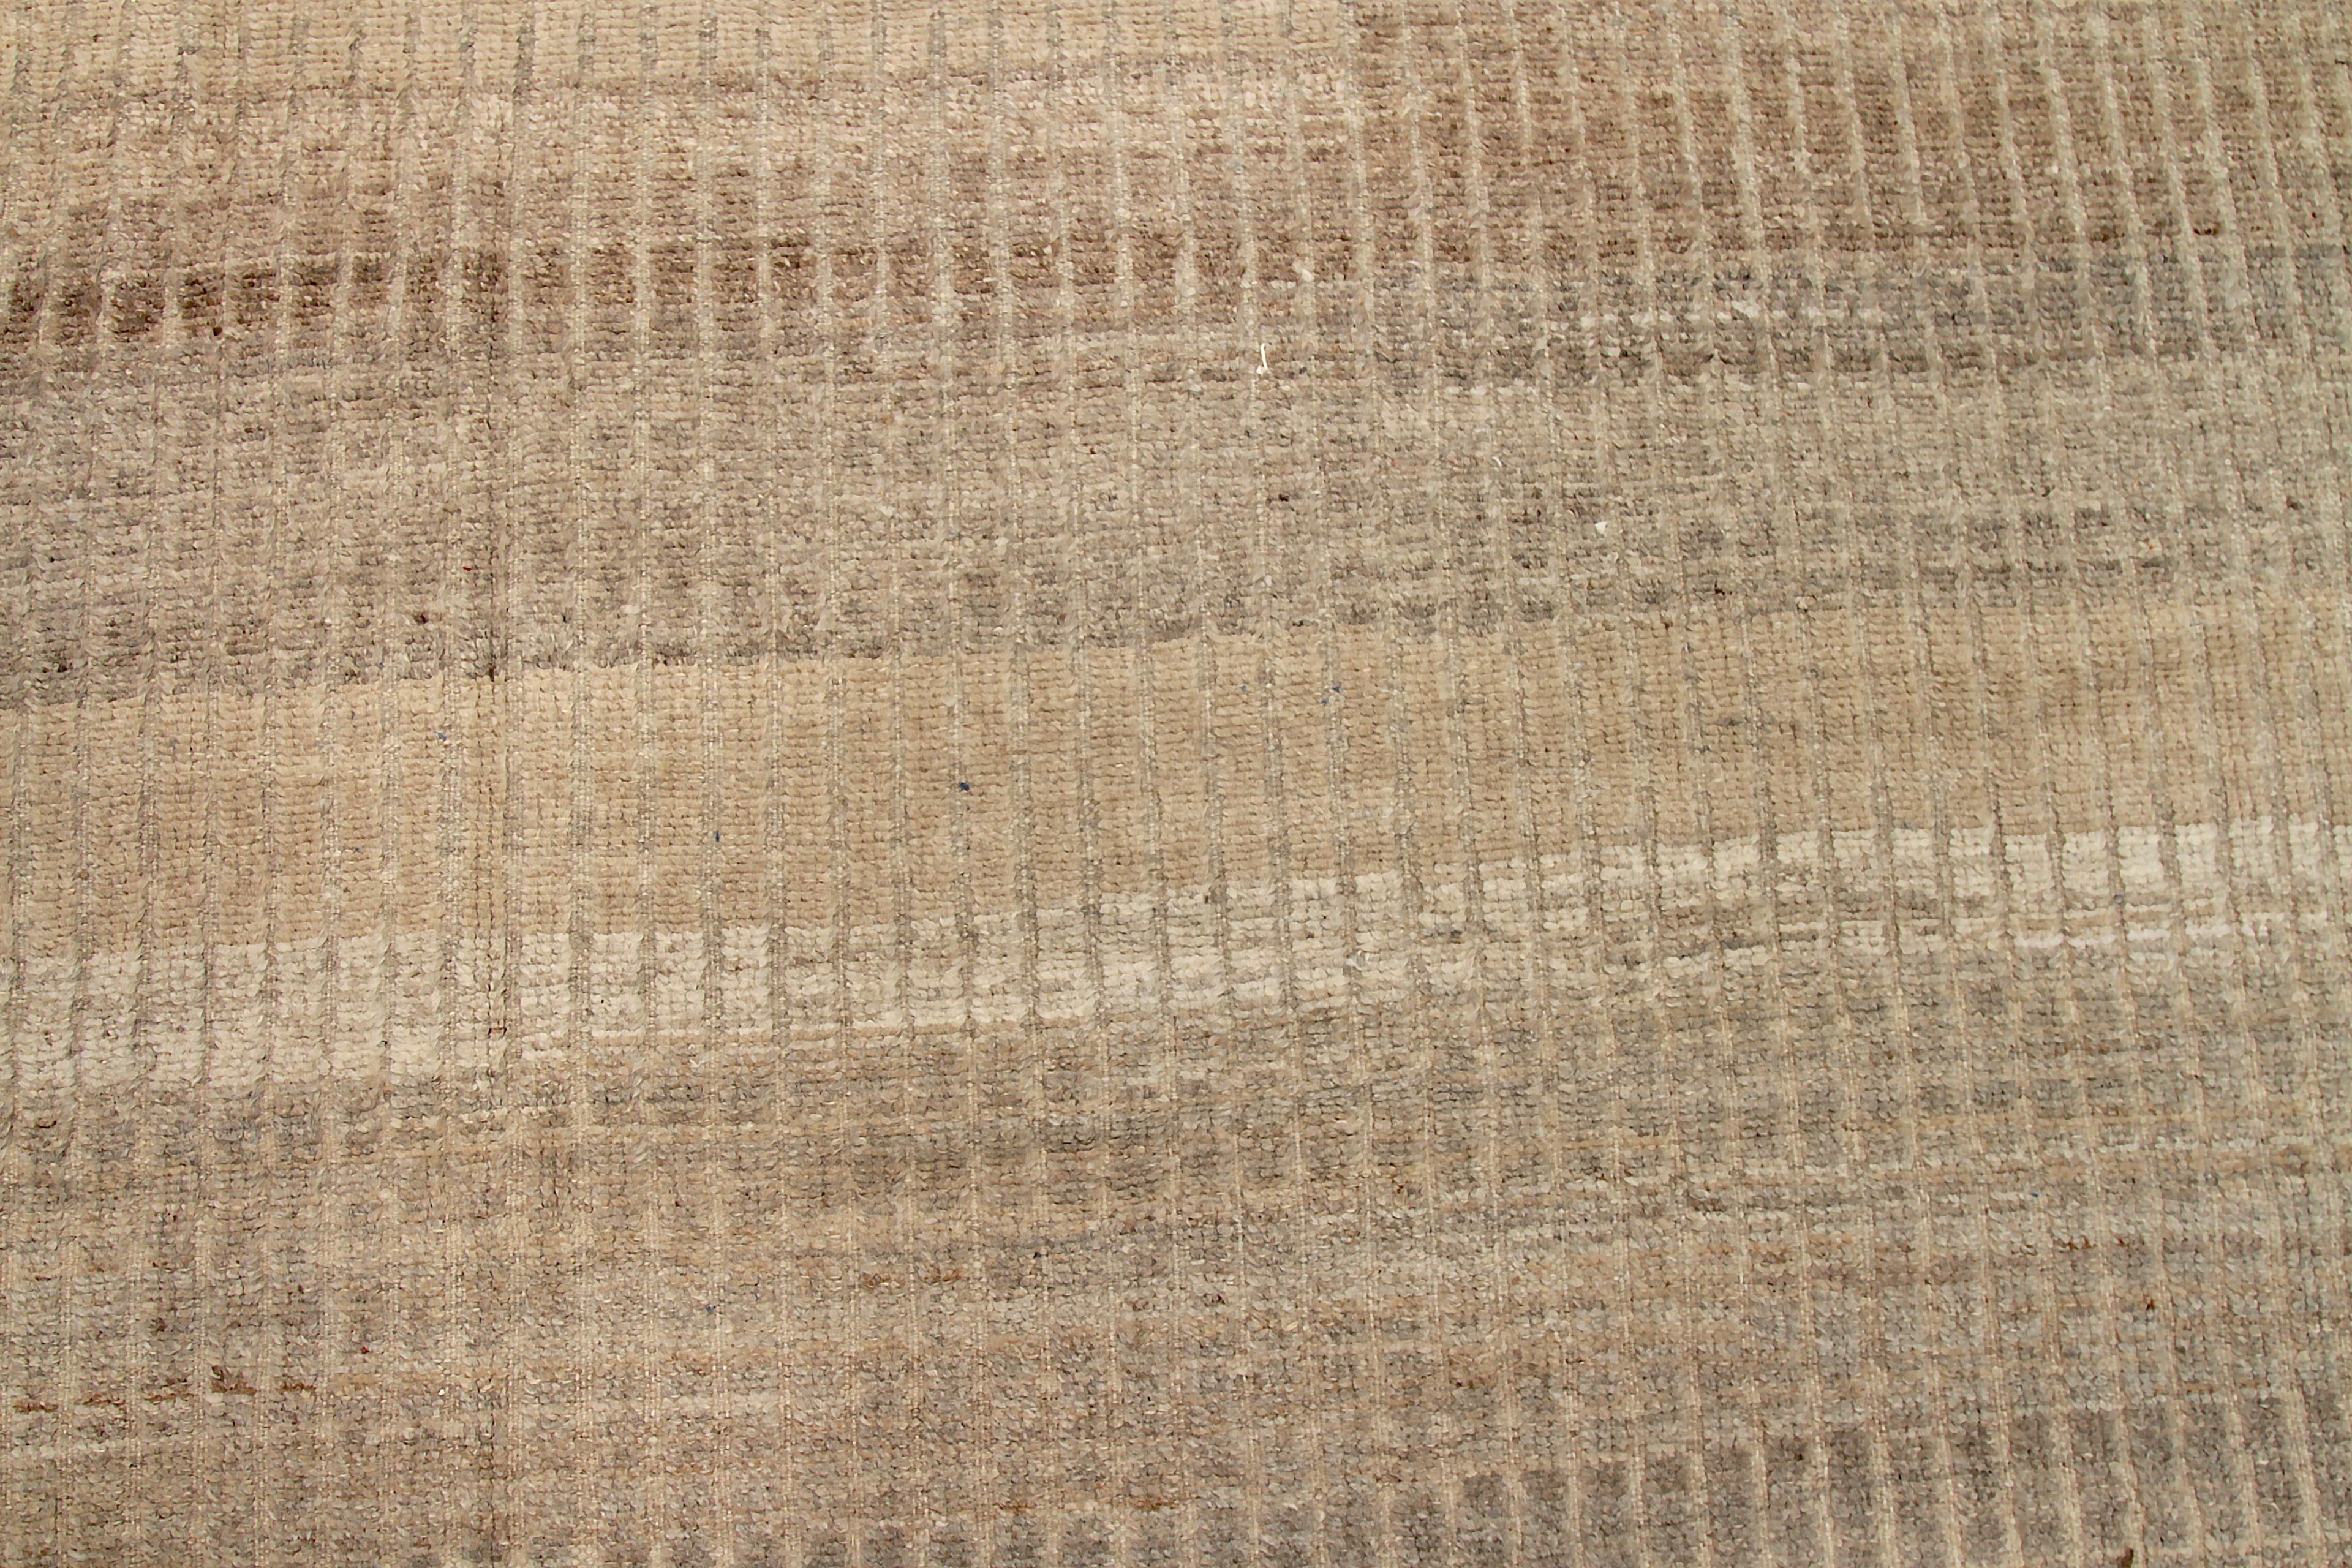 Afghan Nazmiyal Collection Taupe Textured Modern Distressed Rug. 9 ft 2 in x 12 ft 1 in